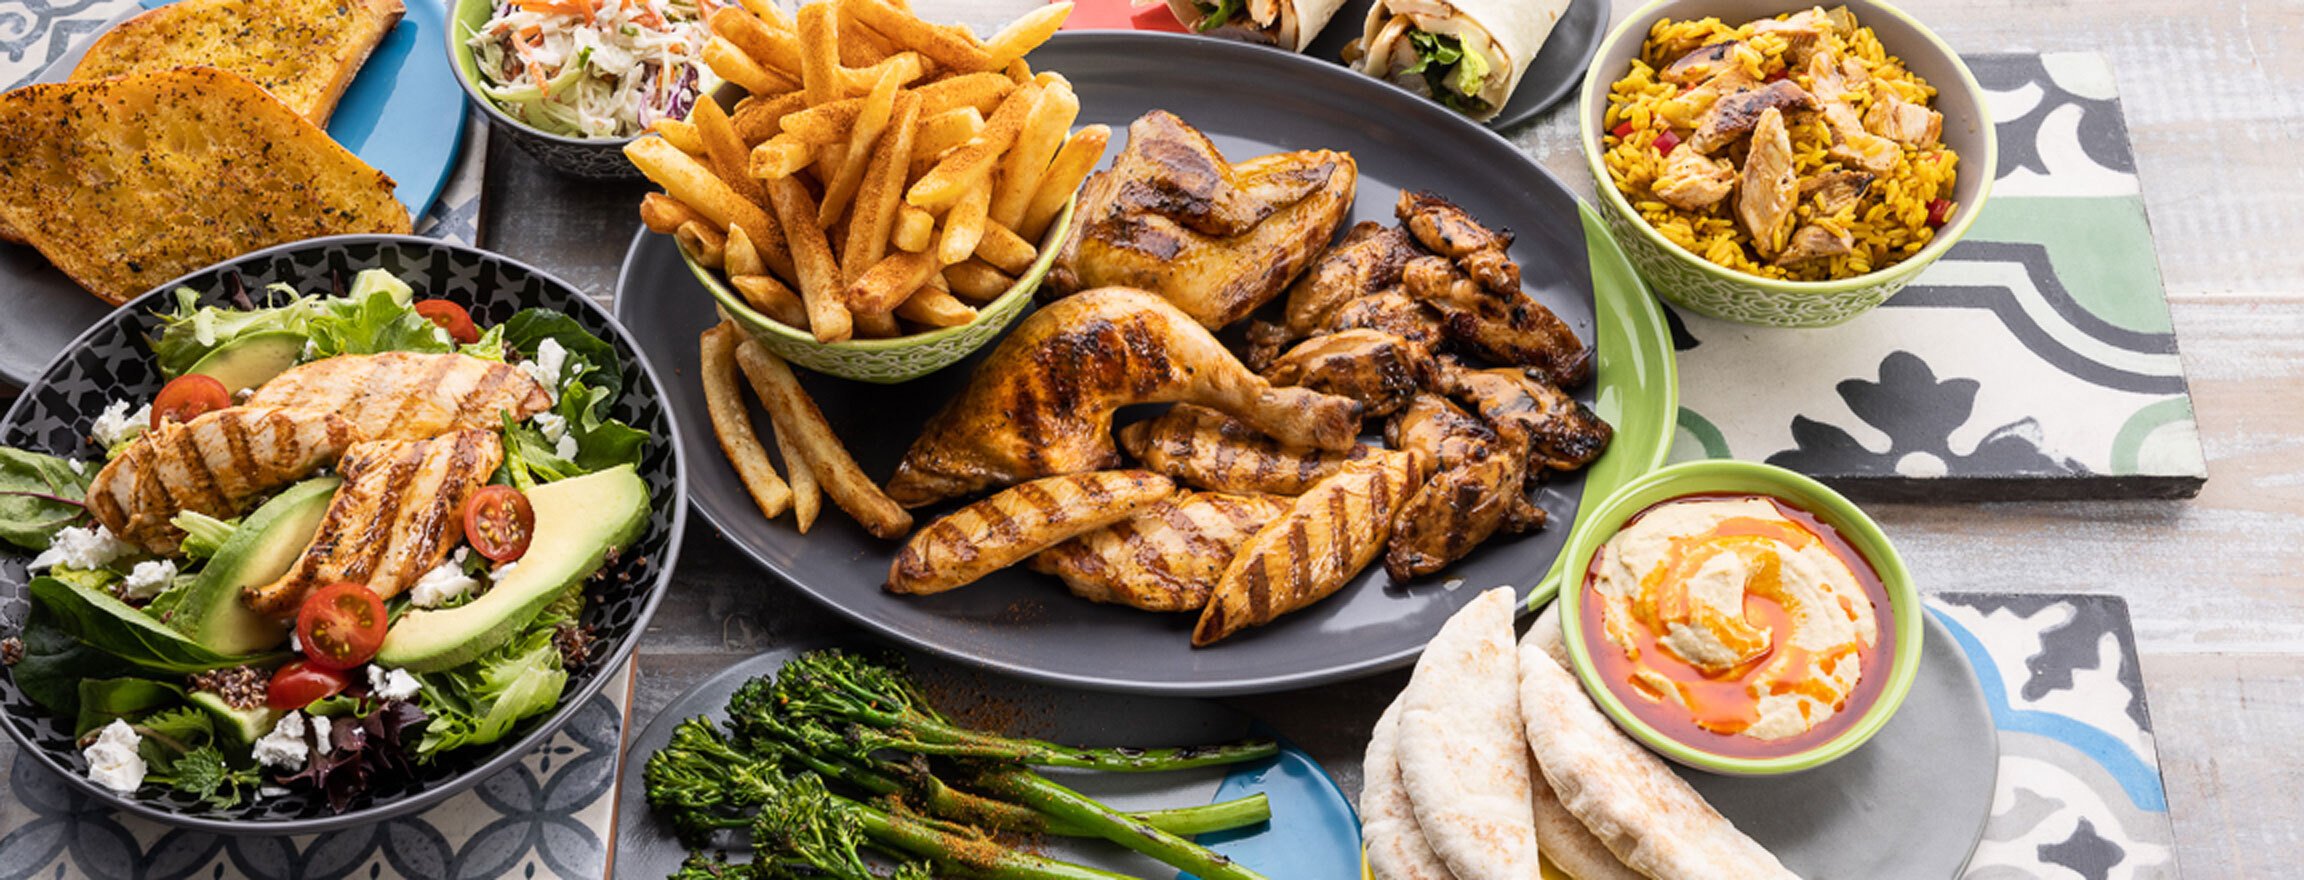 a Nando’s meal on a table including PERi-PERi chicken, a salad, chips, and a selection of sides